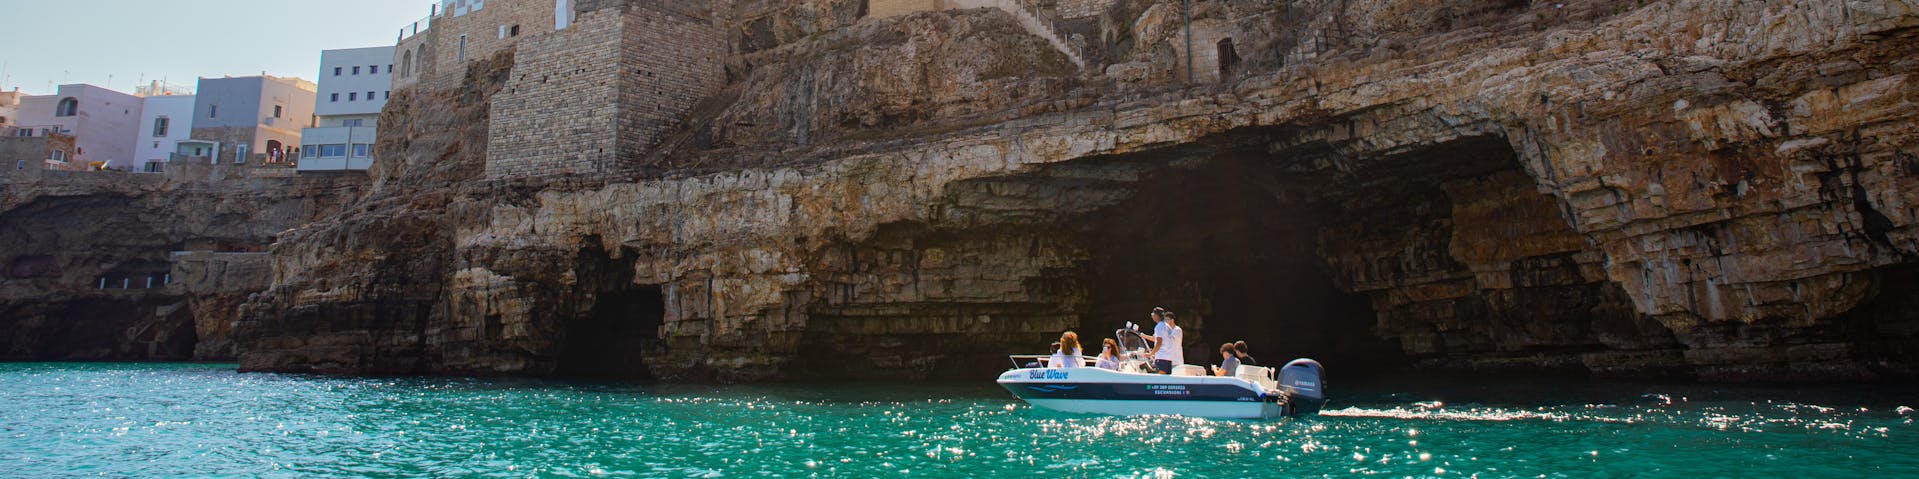 The Blue Wave boat coasting Polignano a Mare Caves during the Boat Trip to Polignano a Mare Caves with Apéritif with Blue Wave.